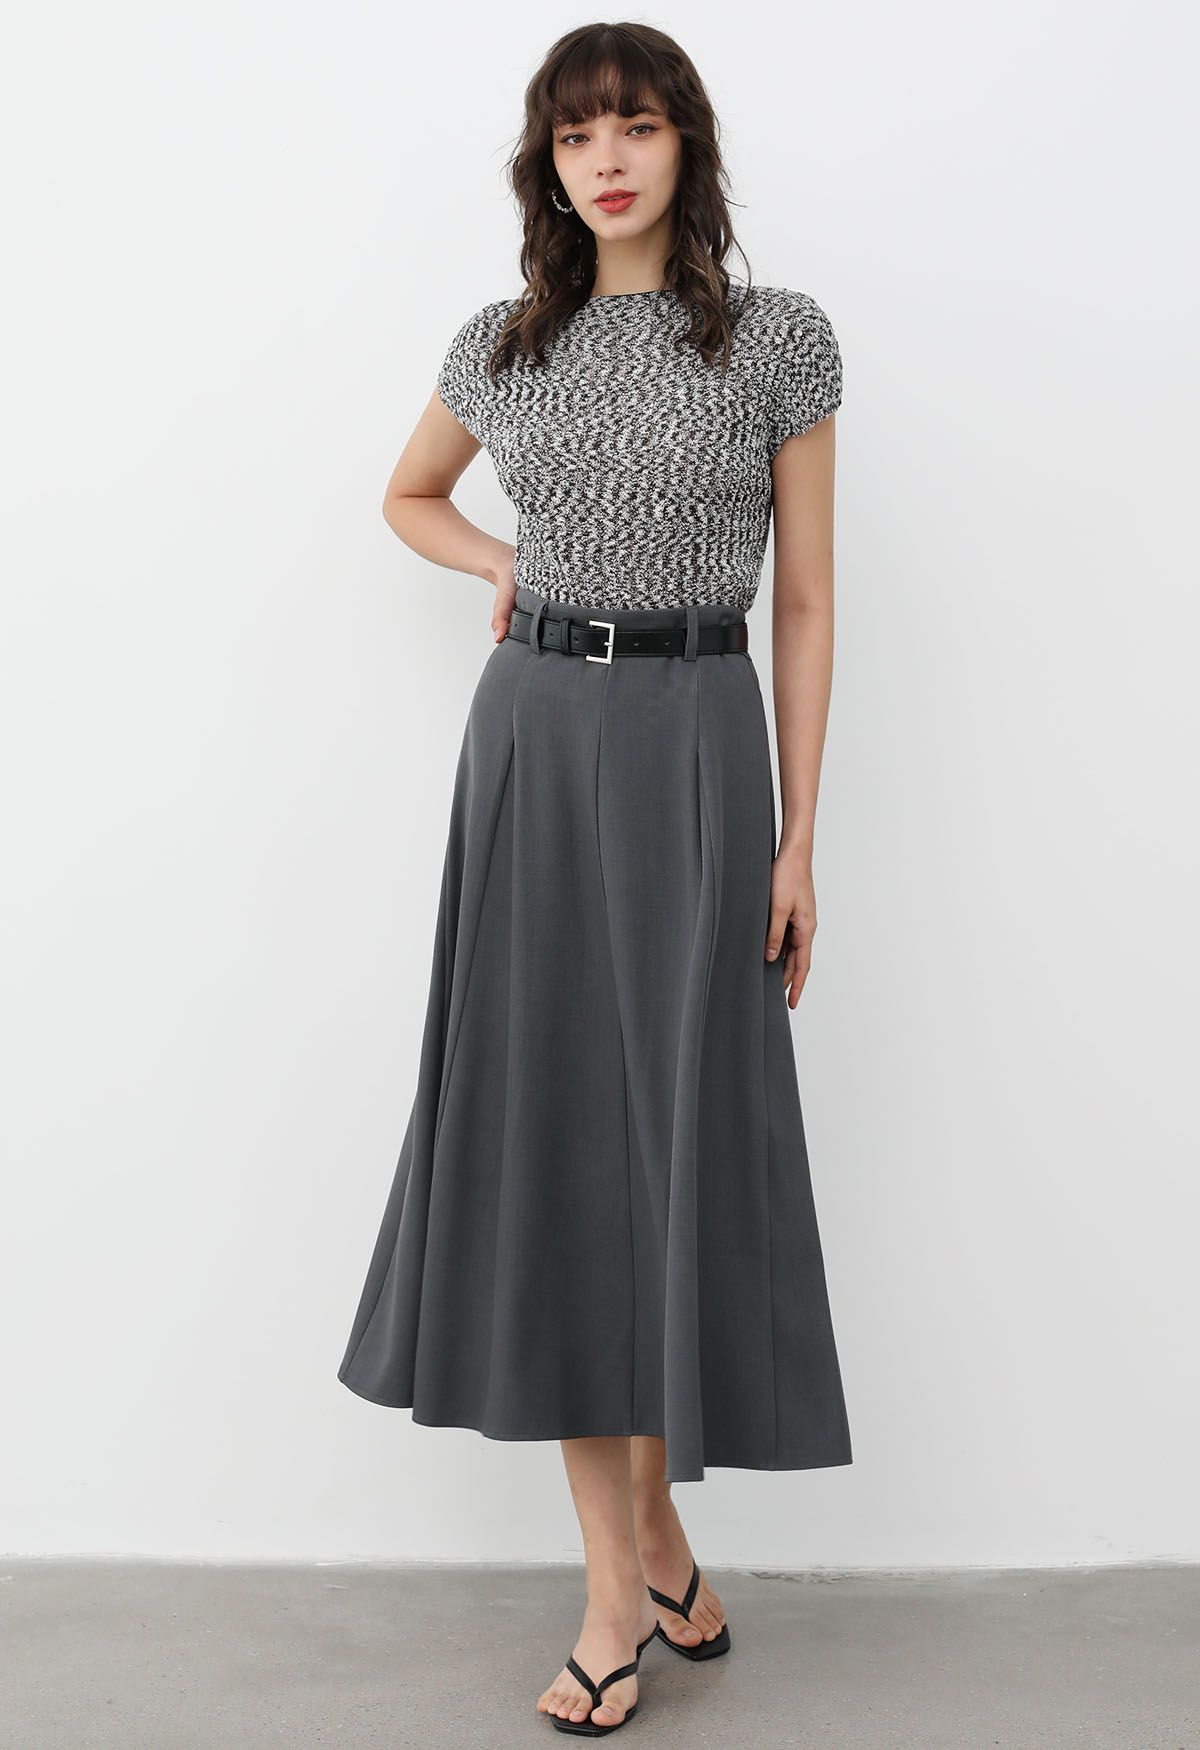 Chic Illusion Belted Flare Maxi Skirt in Smoke